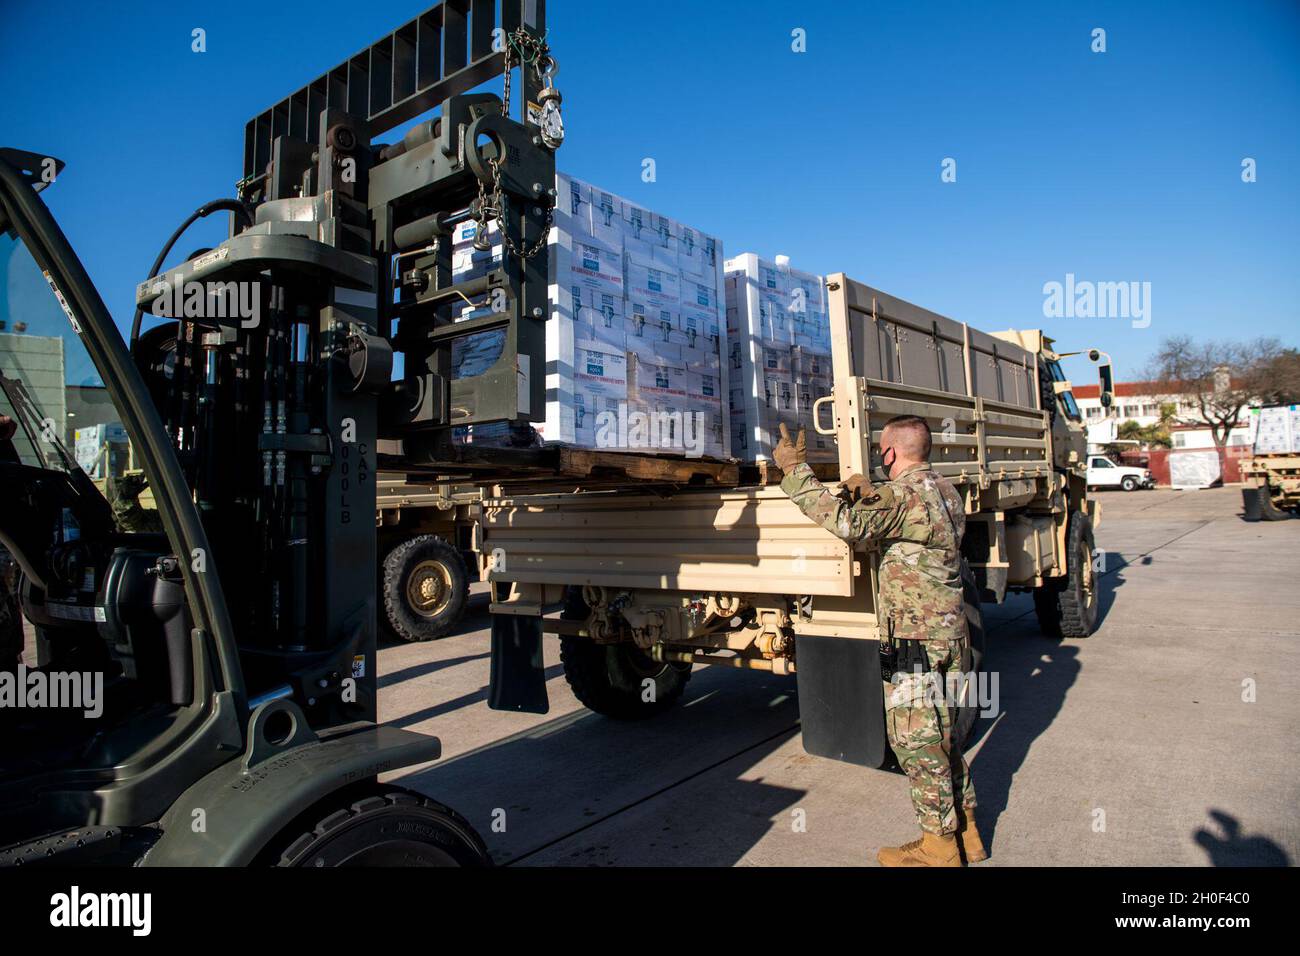 U.S. Air Force Tech. Sgt. Jesse Farmer, 502nd Logistics Readiness Squadron non-commissioned officer in charge, assists with the transportation of pallets of bottled water, Feb. 21, 2021, at Joint Base San Antonio-Kelly Field, Texas. The 502LRS assisted with the coordinating and unloading of approximately 80,000 bottles of water brought in via aircraft at Kelly Field to be distributed to the city of San Antonio following Winter Storm Uri. Stock Photo